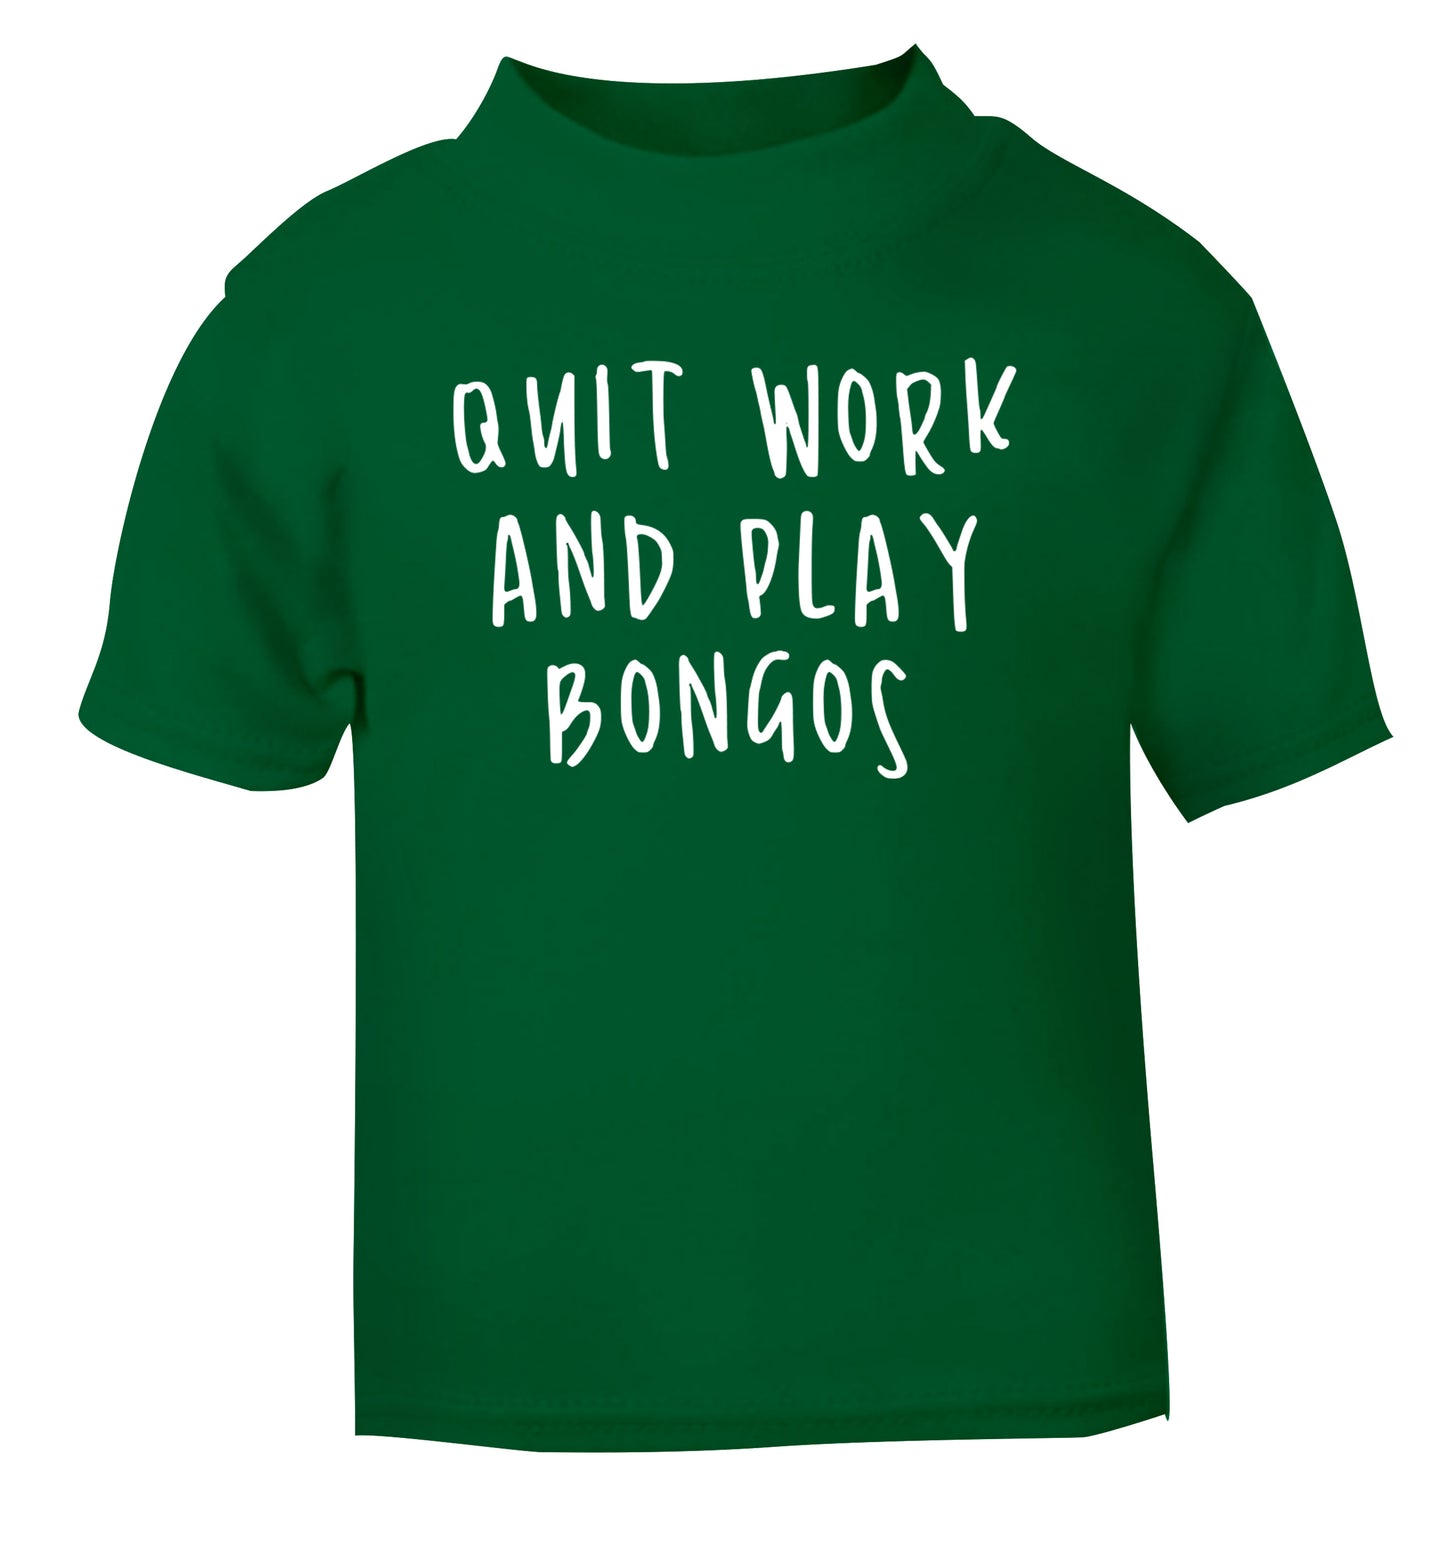 Quit work and play bongos green Baby Toddler Tshirt 2 Years